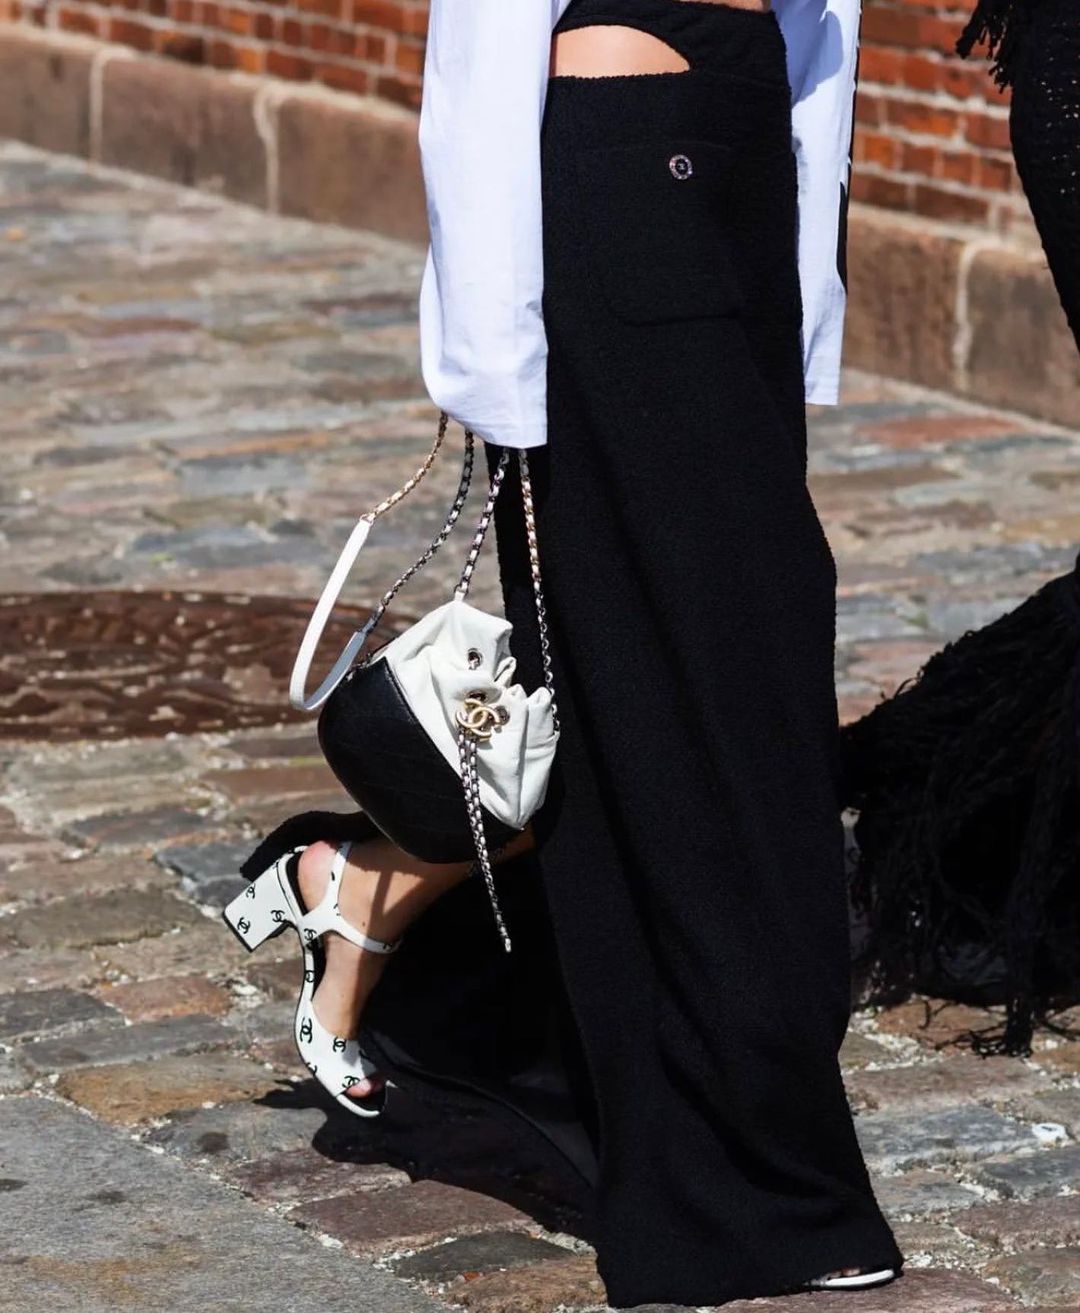 These Chanel Sandals Are Almost Too Beautiful to Wear